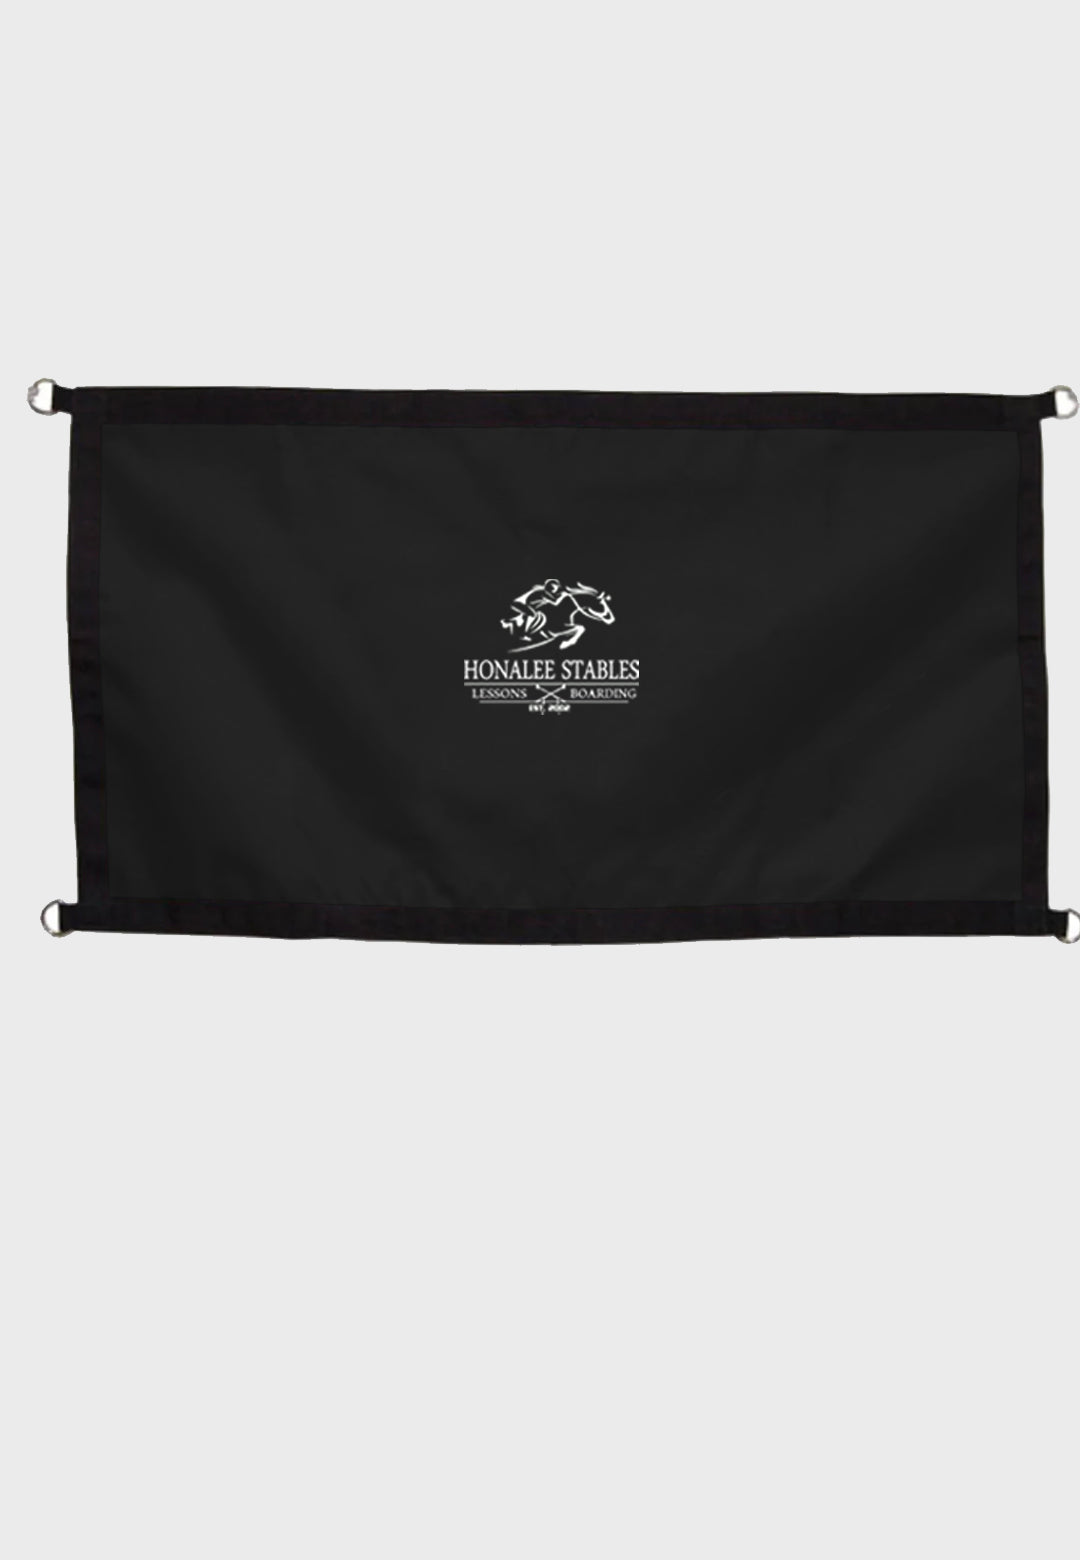 Honalee Stables World Class Equine Stall Guard - Black